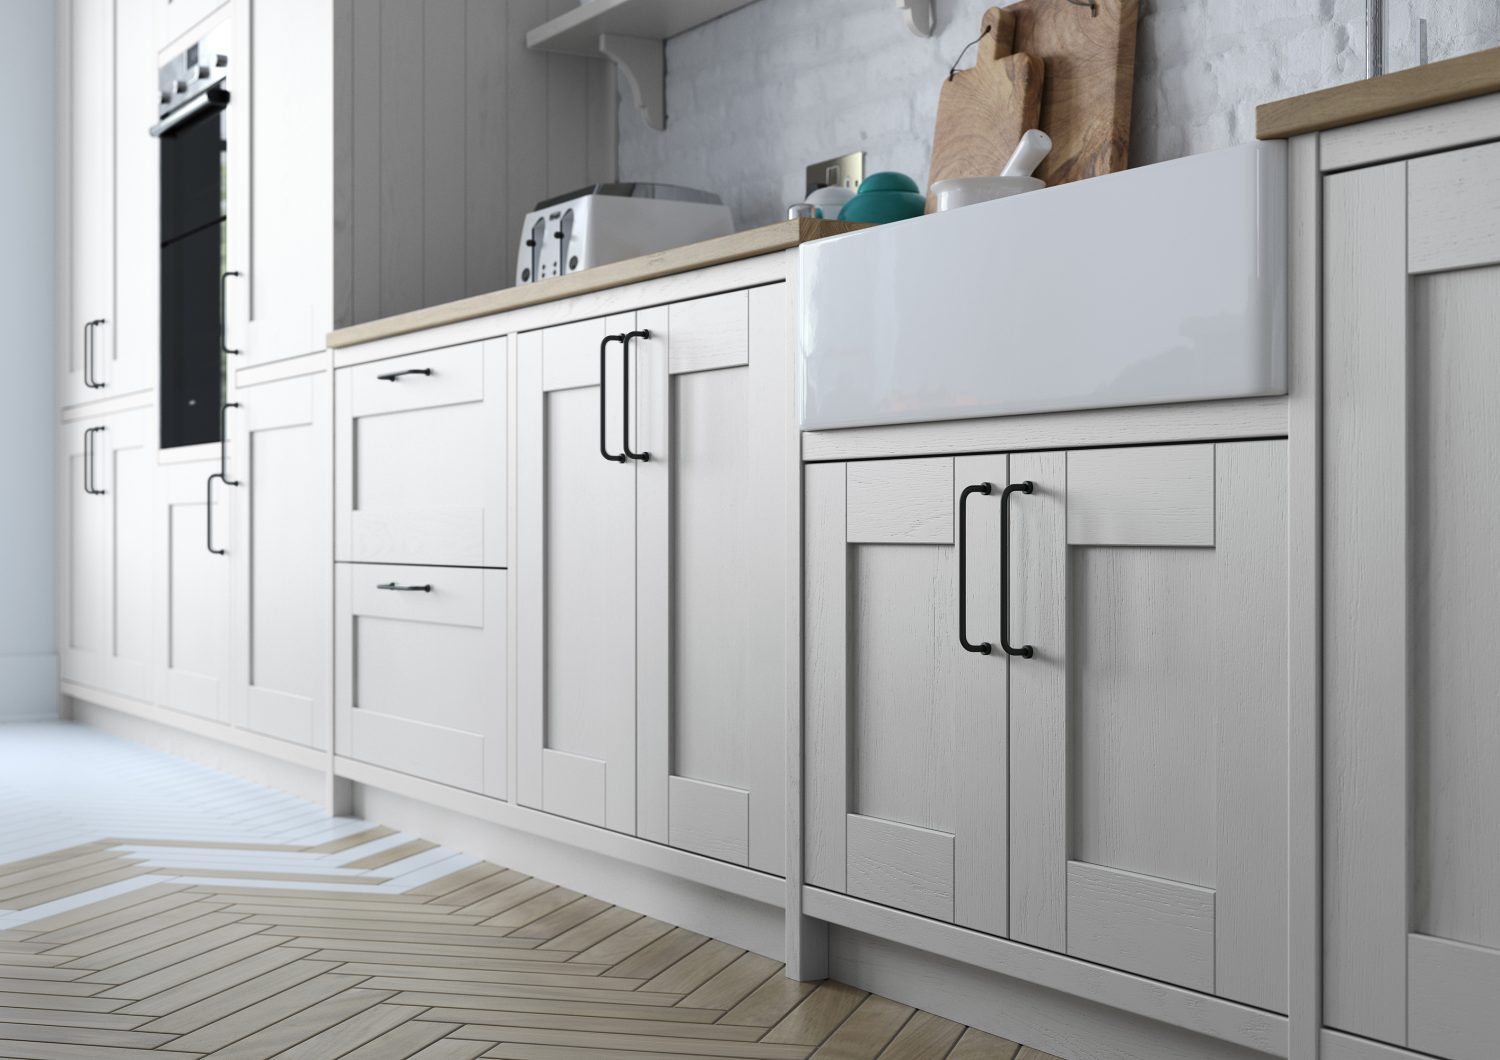 Run of Madison shaker kitchen cabinets in Light Grey, made by The Kitchen Depot